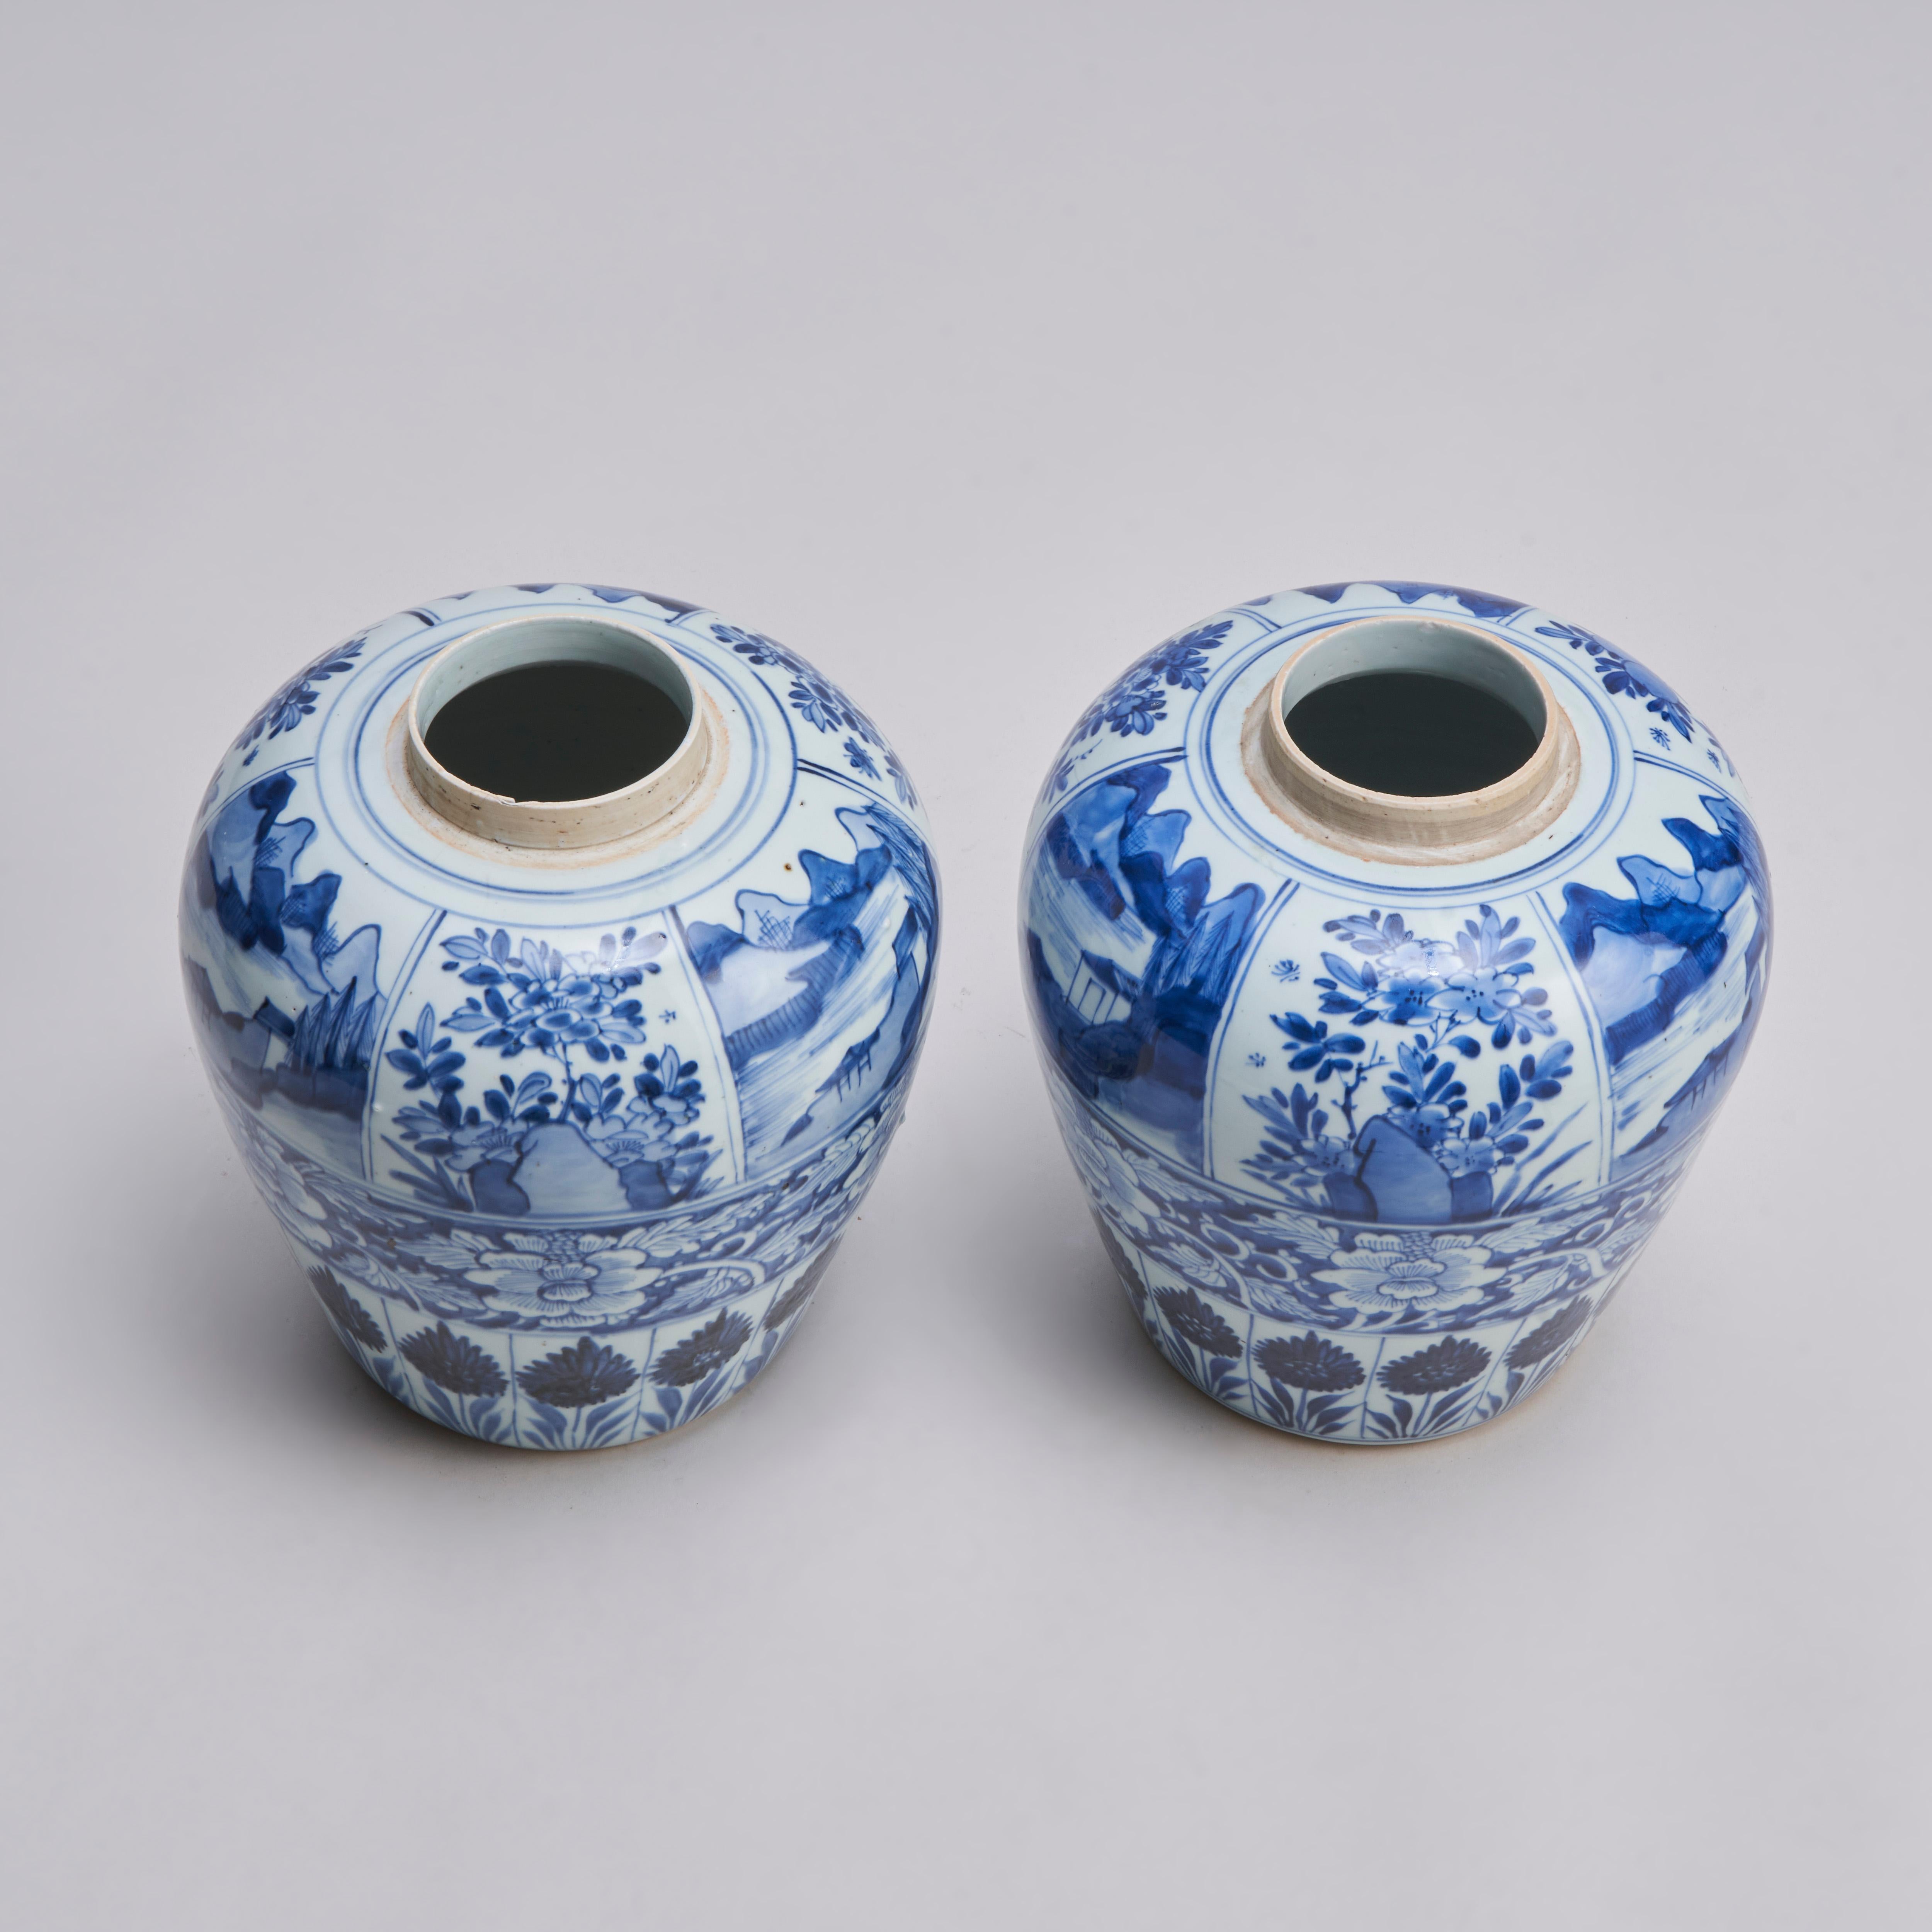 An attractive pair of 18th Century Chinese blue and white ginger jars with decoration of panels of landscapes and flowers. A border of roses and a floral border to the foot.

Contact us for further information, more images or to arrange a viewing.